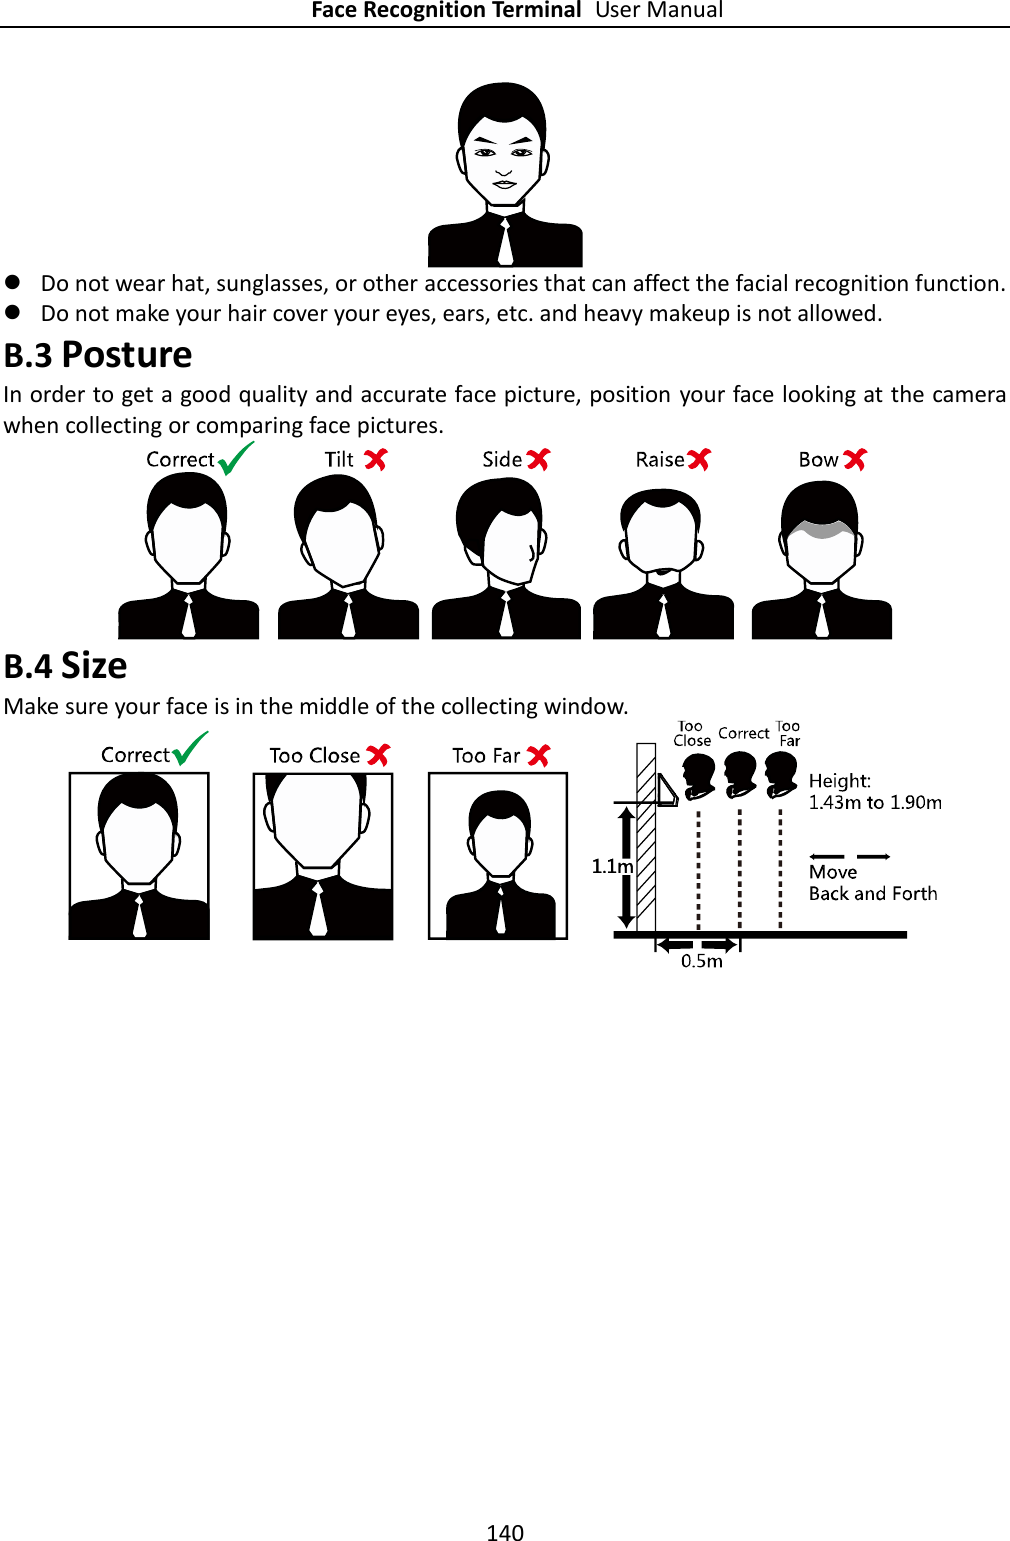 Face Recognition Terminal User Manual 140    Do not wear hat, sunglasses, or other accessories that can affect the facial recognition function.  Do not make your hair cover your eyes, ears, etc. and heavy makeup is not allowed. B.3 Posture In order to get a good quality and accurate face picture, position your face looking at the camera when collecting or comparing face pictures.  B.4 Size Make sure your face is in the middle of the collecting window.  